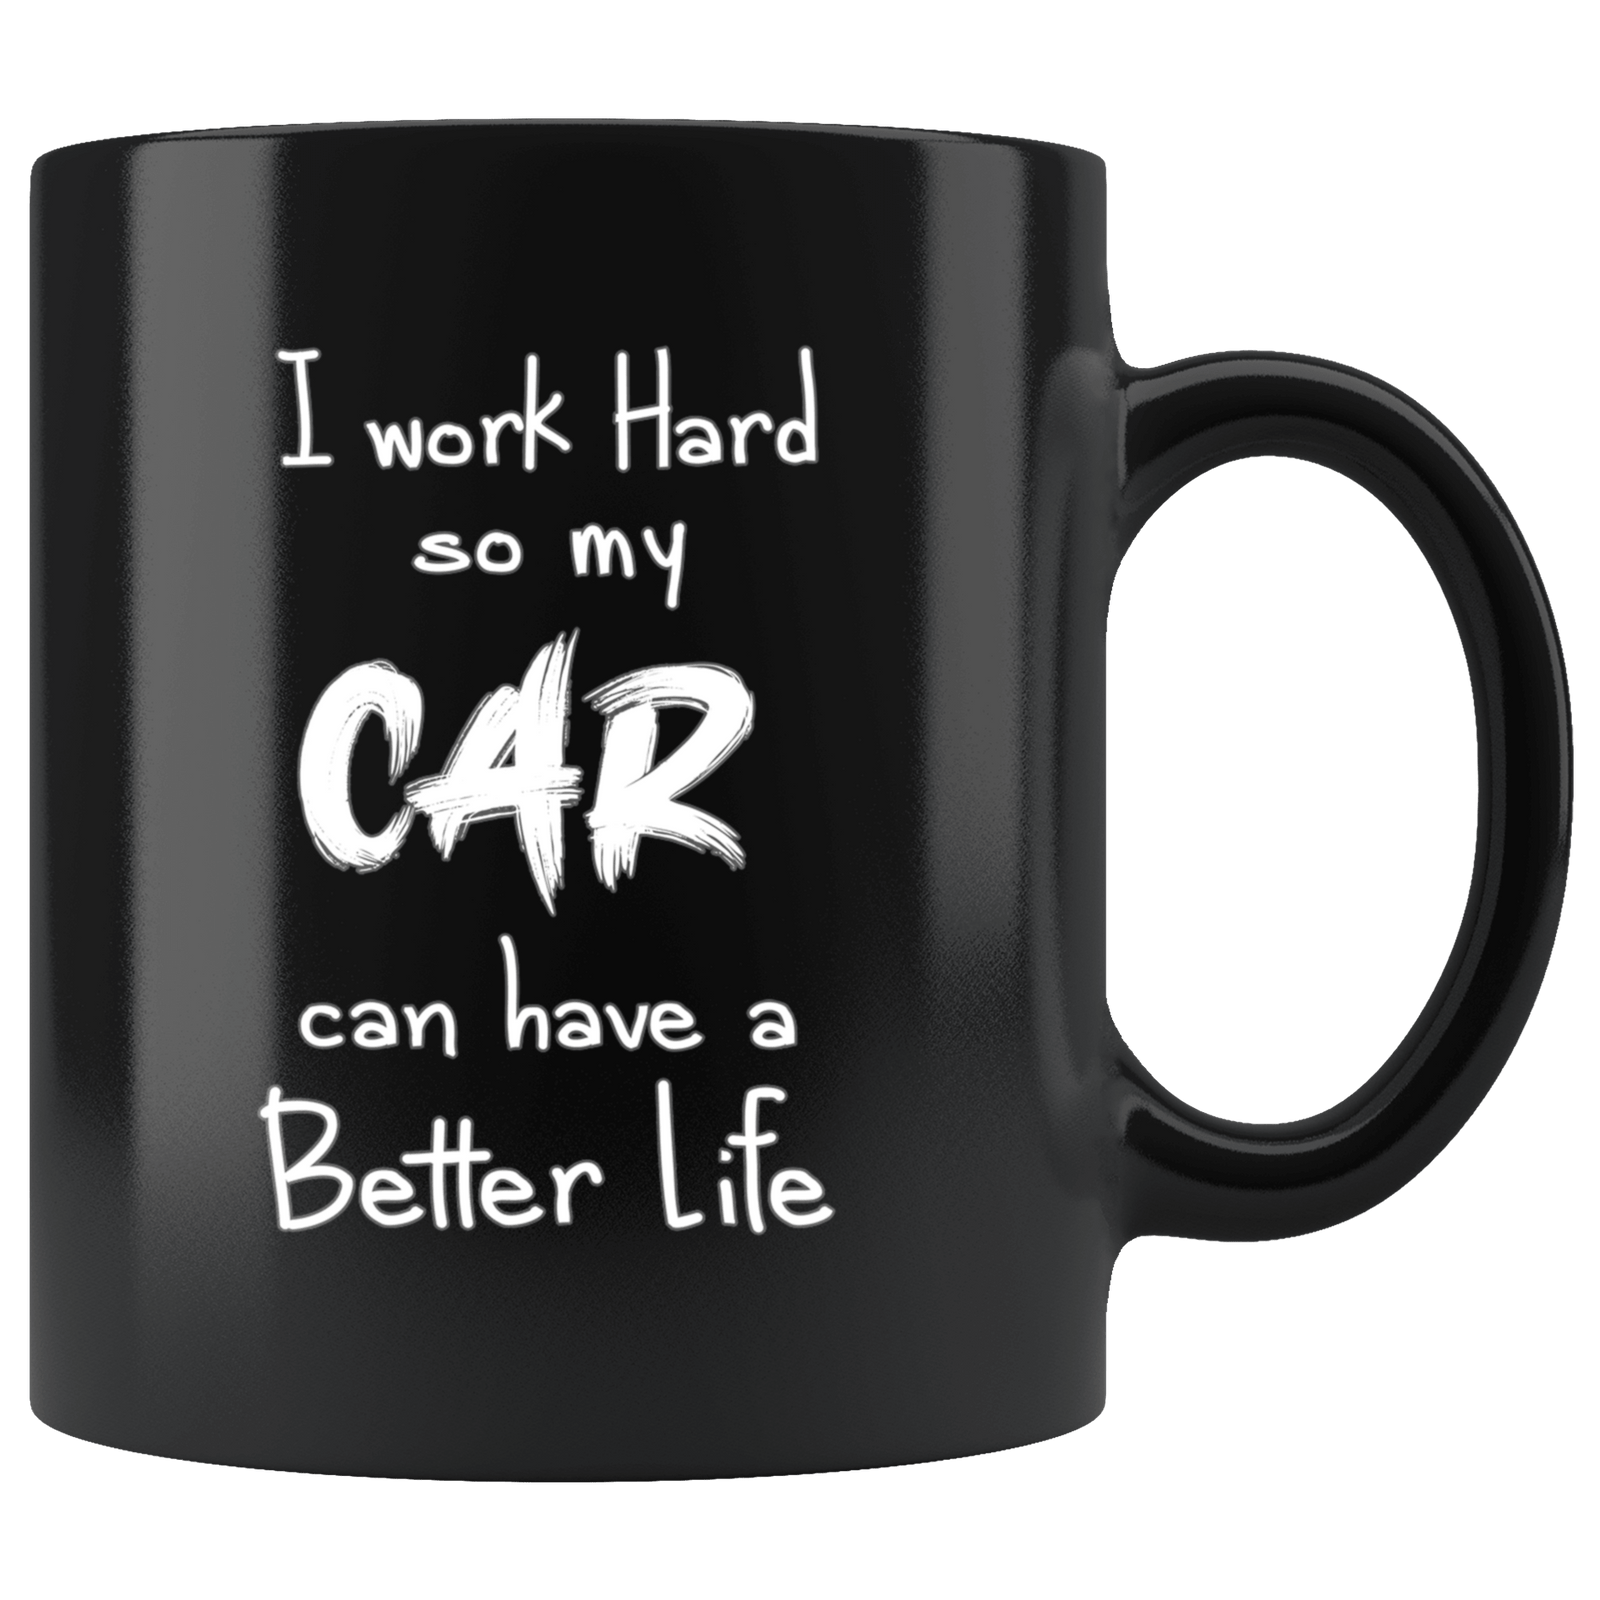 Luxe Gifting Drifting Car Racer Coffee Mug 11oz Black - Leave Tire Marks -  Drag Racing Wife Fuel Speed Racer Car Guys Circuit